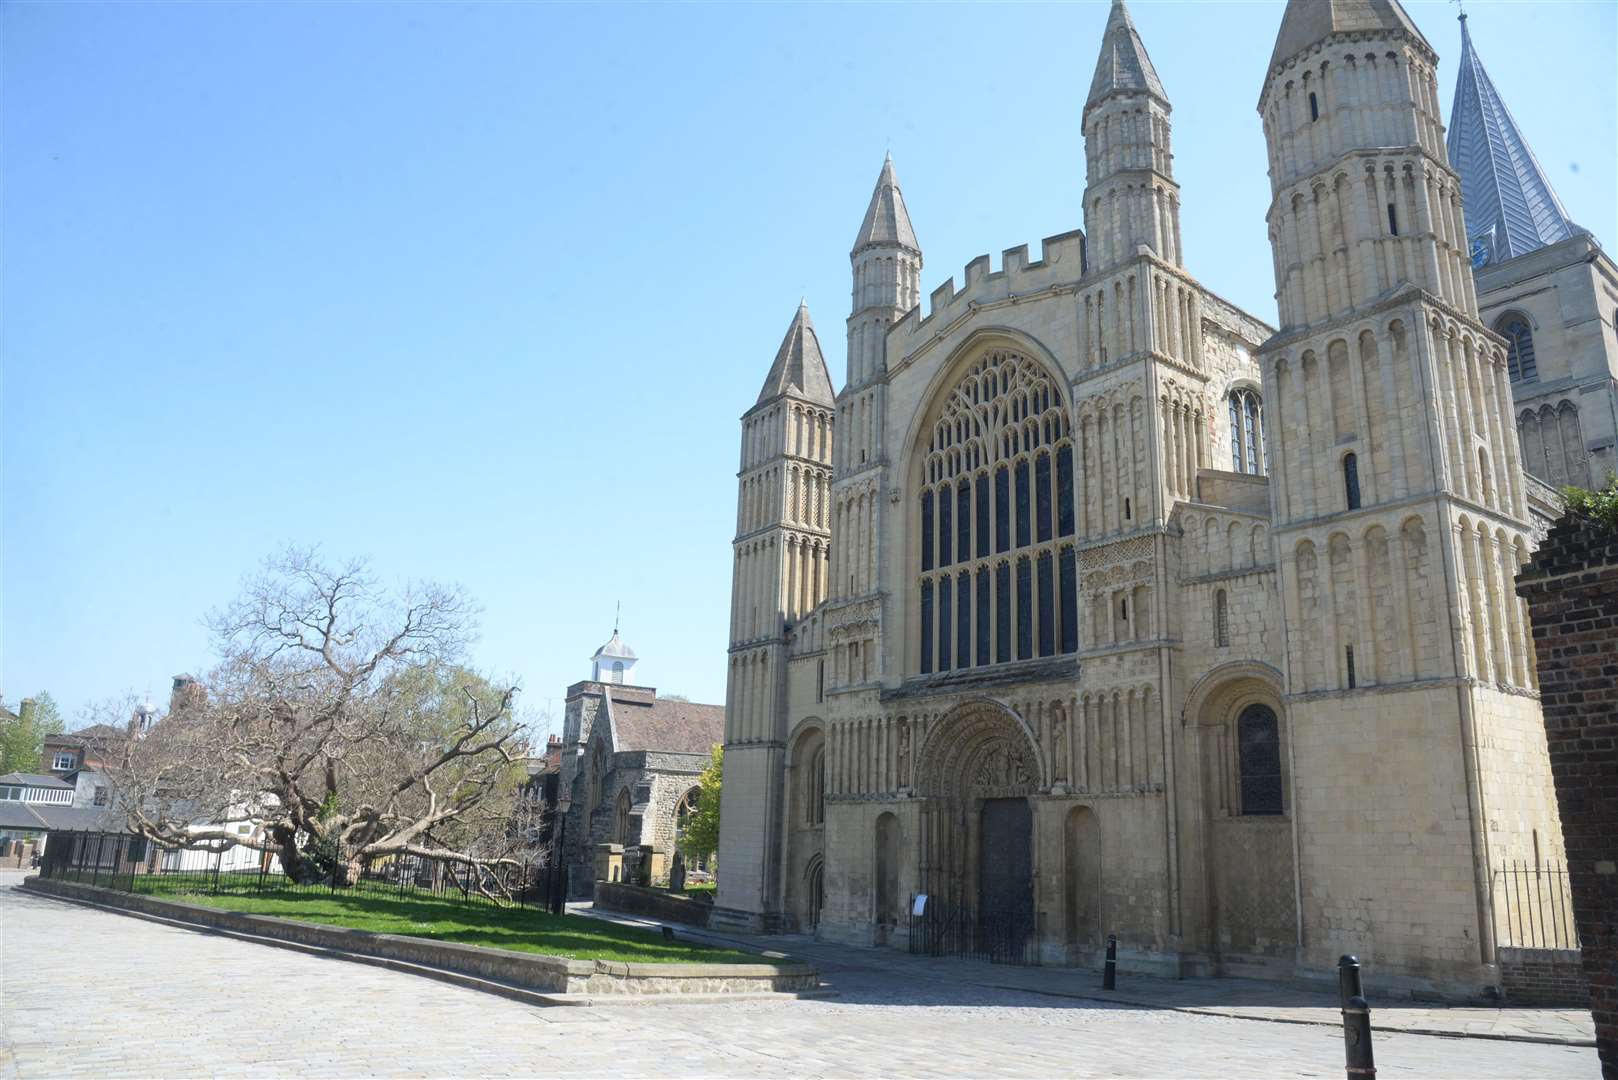 Rochester Cathedral will open its doors at the end of the month for the first time since the lockdown